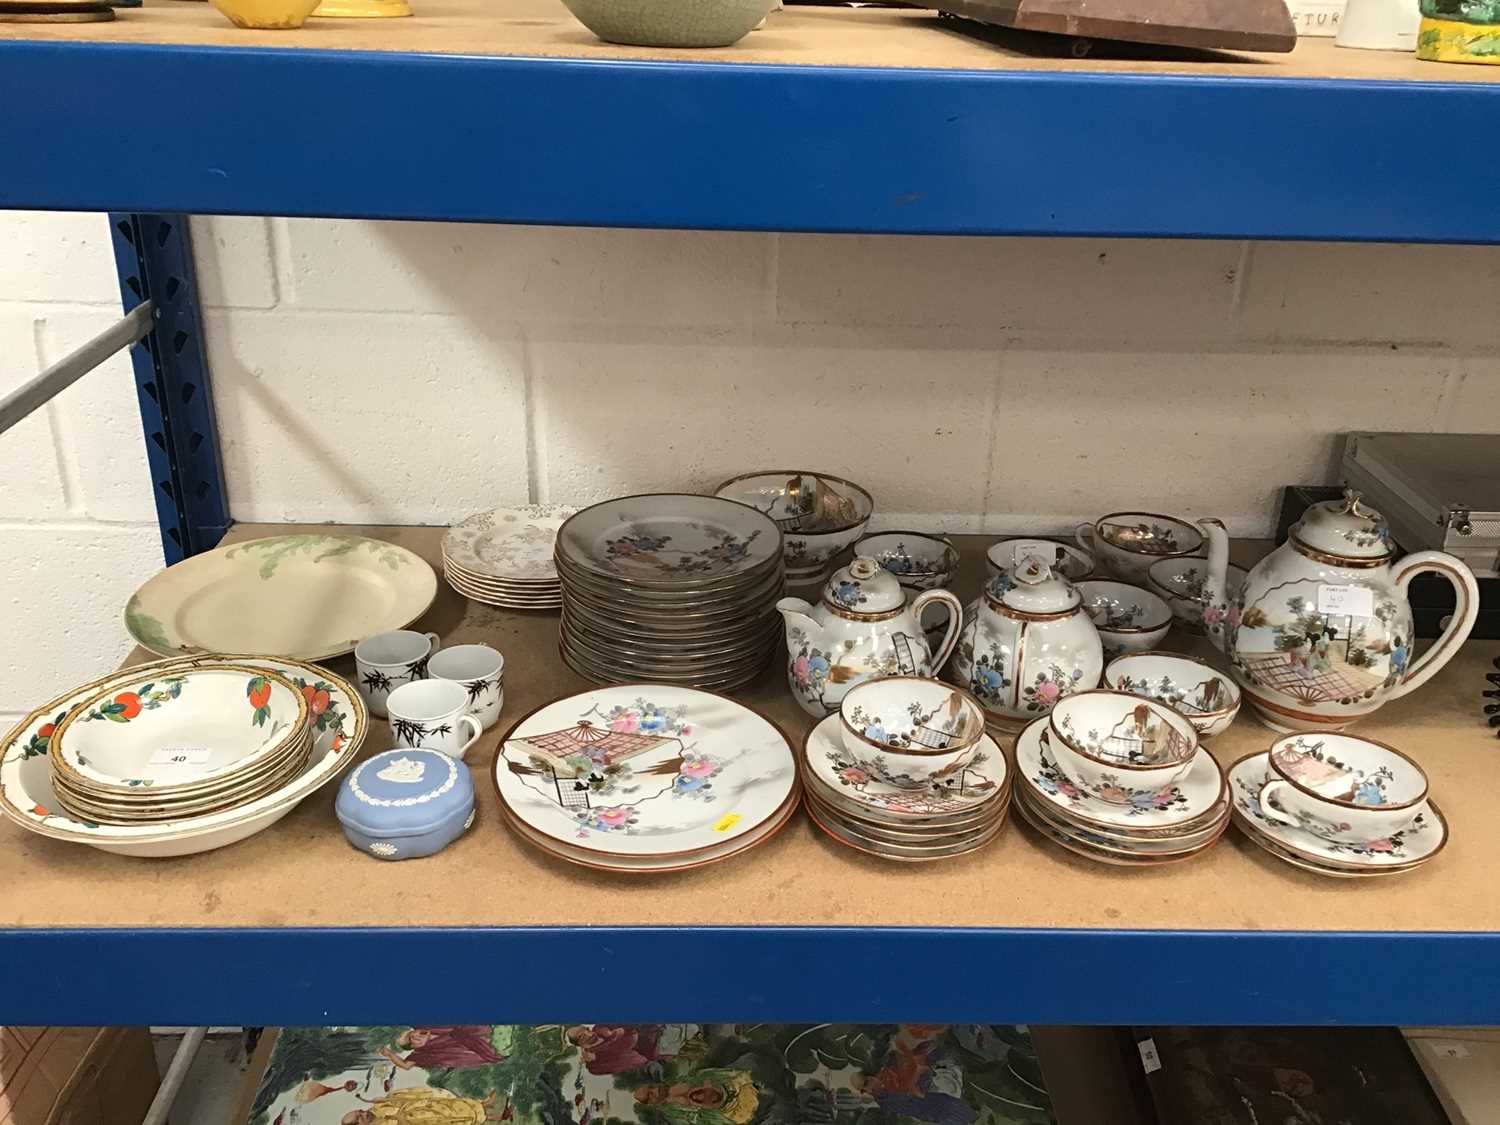 Lot 40 - Collection of Japanese Egg shell teawares, together with other decorative ceramics together with telephone, books and sundries